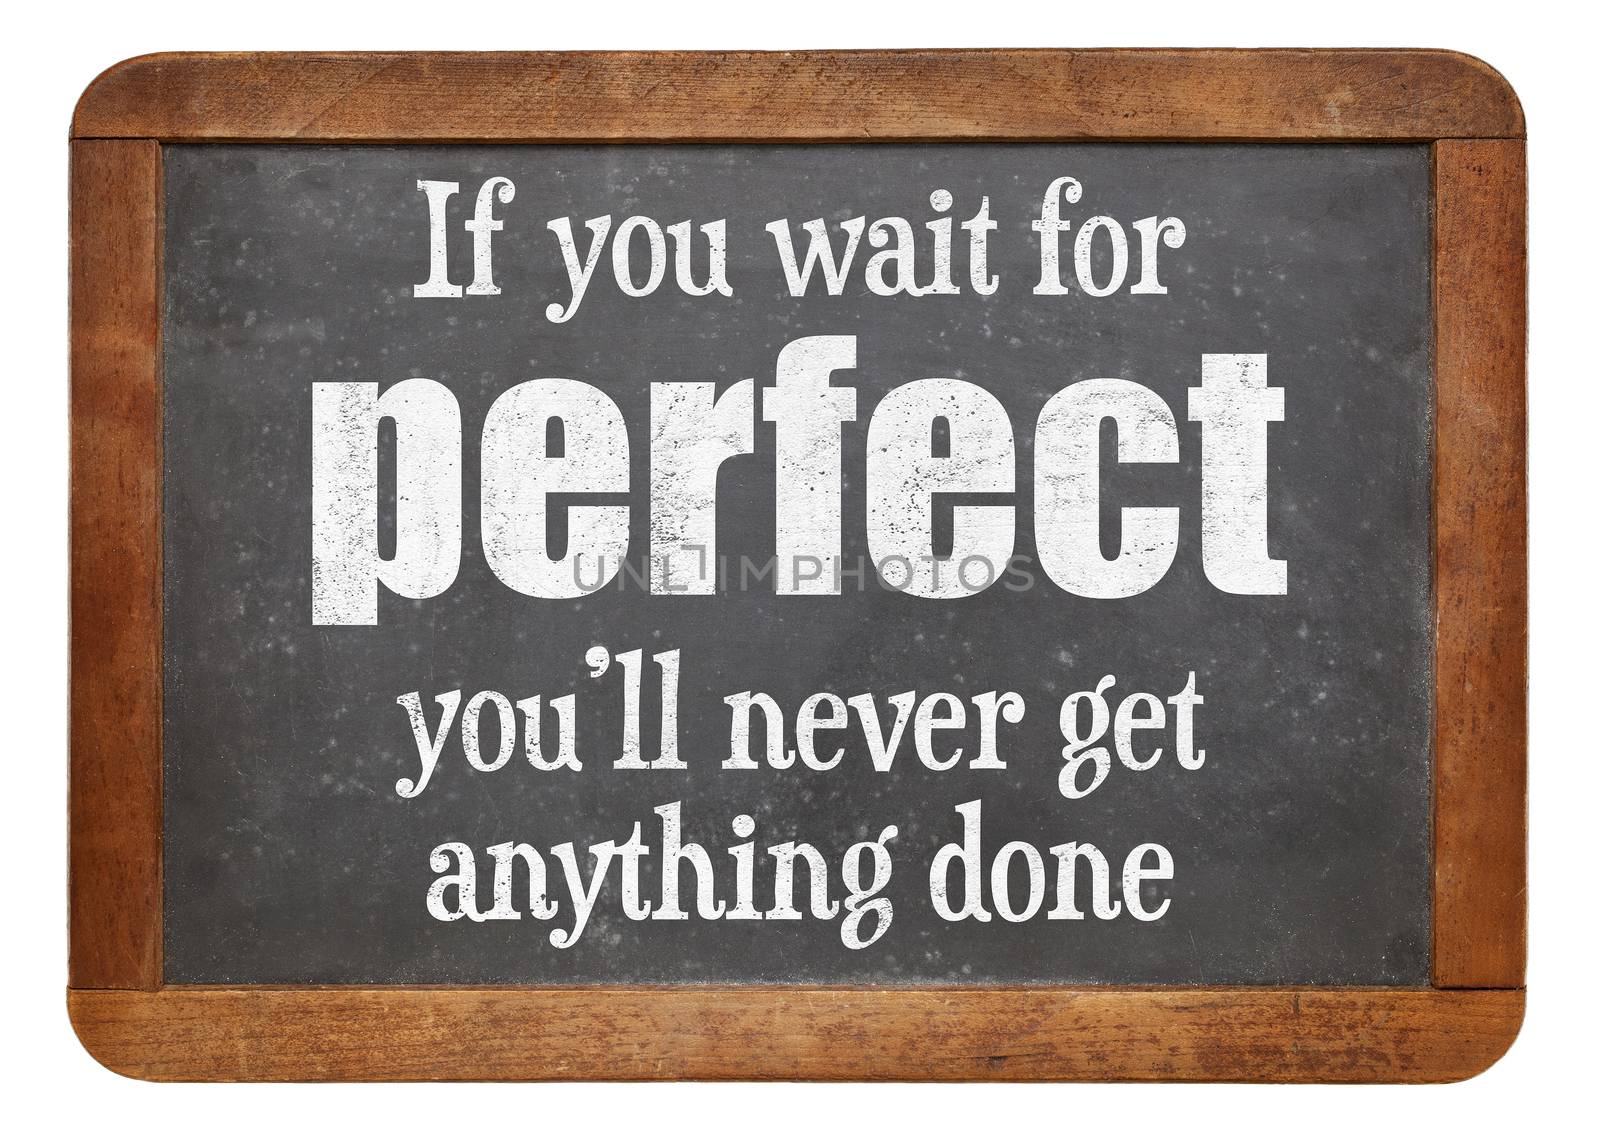 If you wait for perfect you will never get anything done - words of wisdom on a vintage slate blackboard